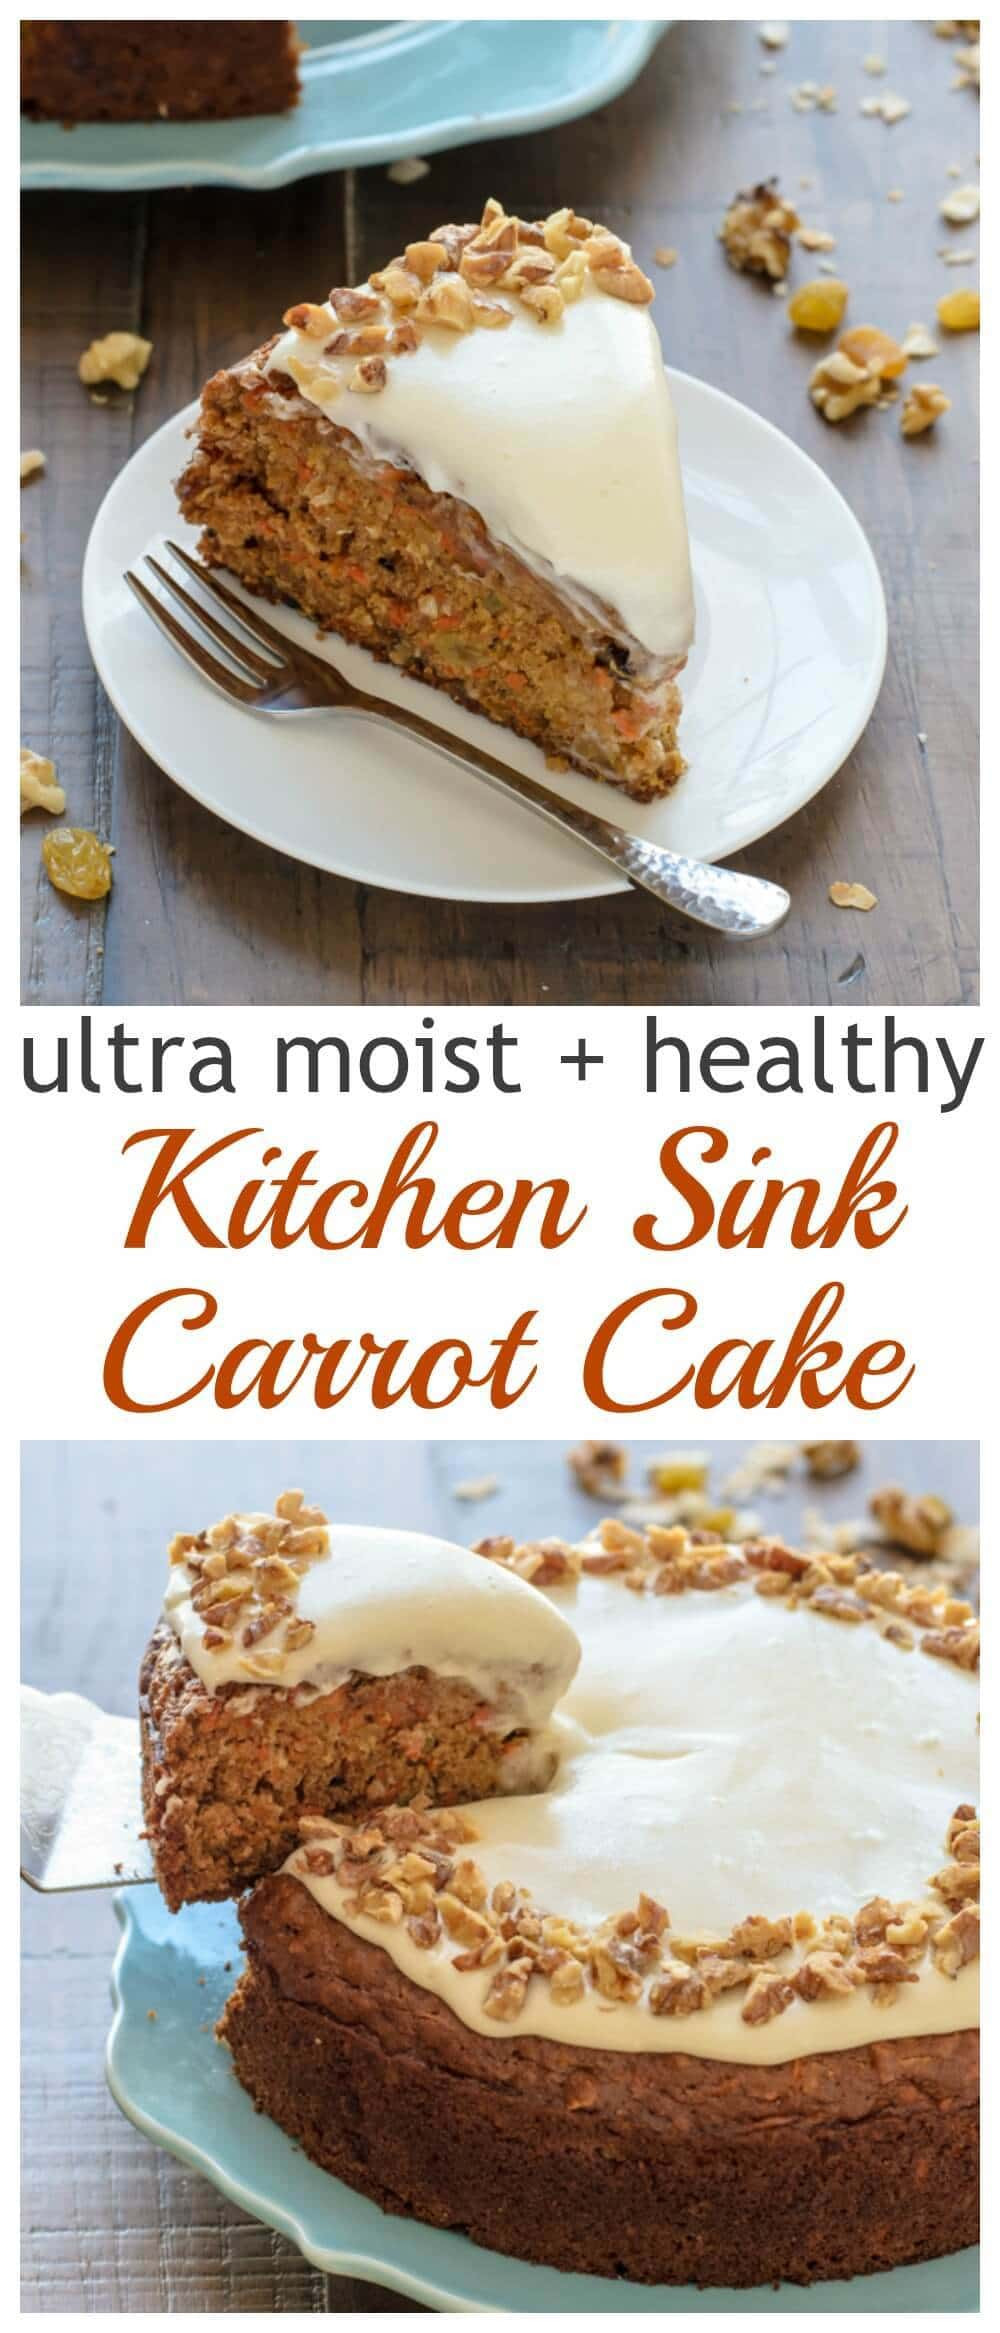 Healthy Carrot Cake Frosting
 Healthy Carrot Cake with Light Cream Cheese Frosting